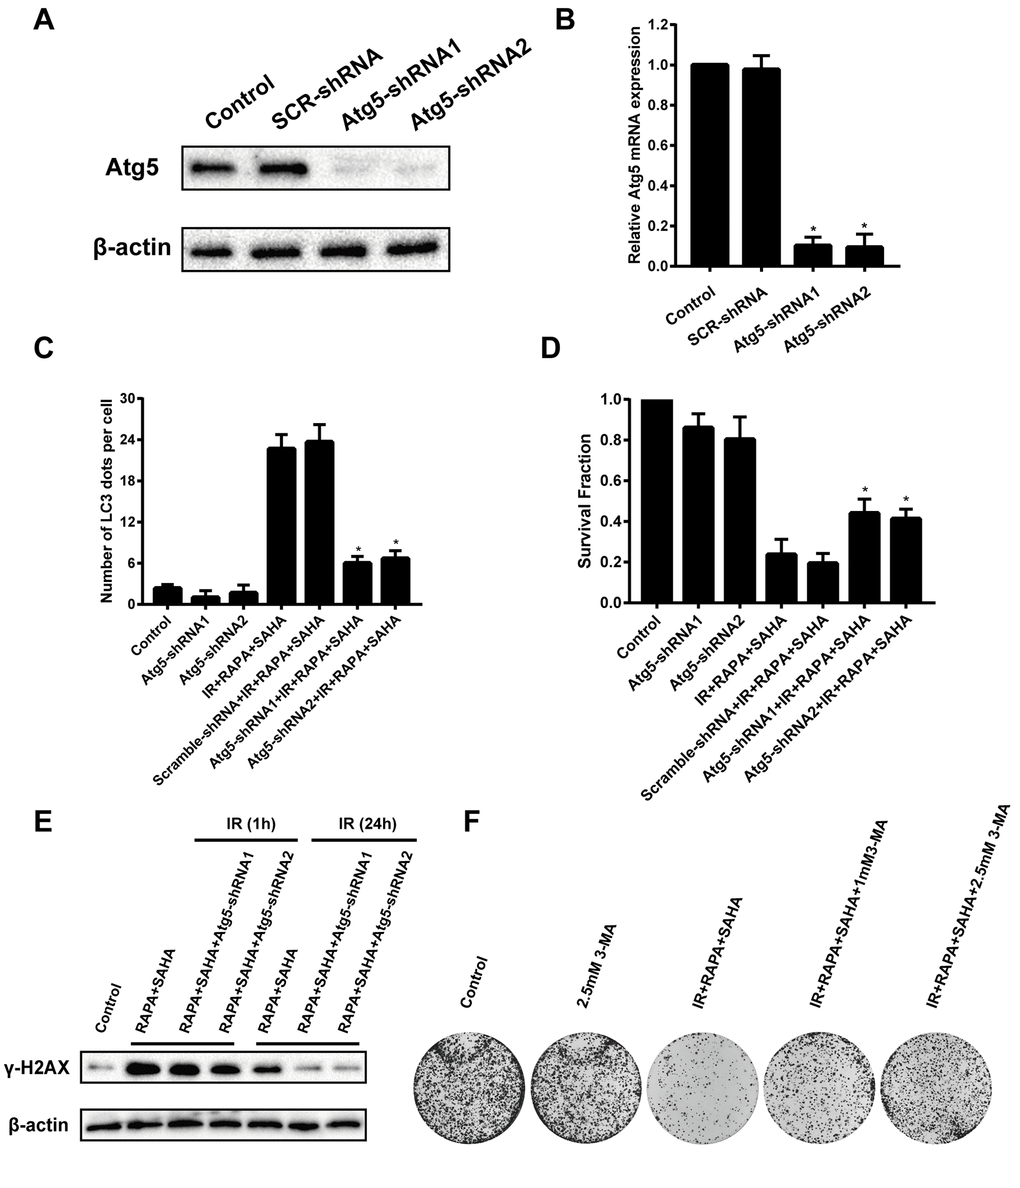 Effects of combination treatment with RAPA and SAHA on IR after down-regulate the level of autophagy in NSCLC cells. A549 cells were infected by a lentivirus delivered Atg5 shRNA for 24h. (A, B) The relative protein and mRNA expression levels of Atg5 were determined by western blot and RT-qPCR analysis. (C) Quantitative data were calculating the number of LC3 dots per A549 cell by using an immunofluorescence confocal microscope. (D) Survival fractions of A459 cells were assessed by the colony formation assay. (E) γ-H2AX protein was determined by western blot analysis. A549 cells were treated with RAPA (100nmol/L) and SAHA (2.5μmol/L) for 24h and were subsequently exposed to IR (4Gy) for 1h and 24h after transfected with or without Atg5 shRNA for 24h. (F) Colony formation assay in A549 cells resulting from IR after treatment with different concentrations of 3-MA or without 3-MA. A549 cells were pretreated with 3-MA for 1h before RAPA and SAHA treatment.